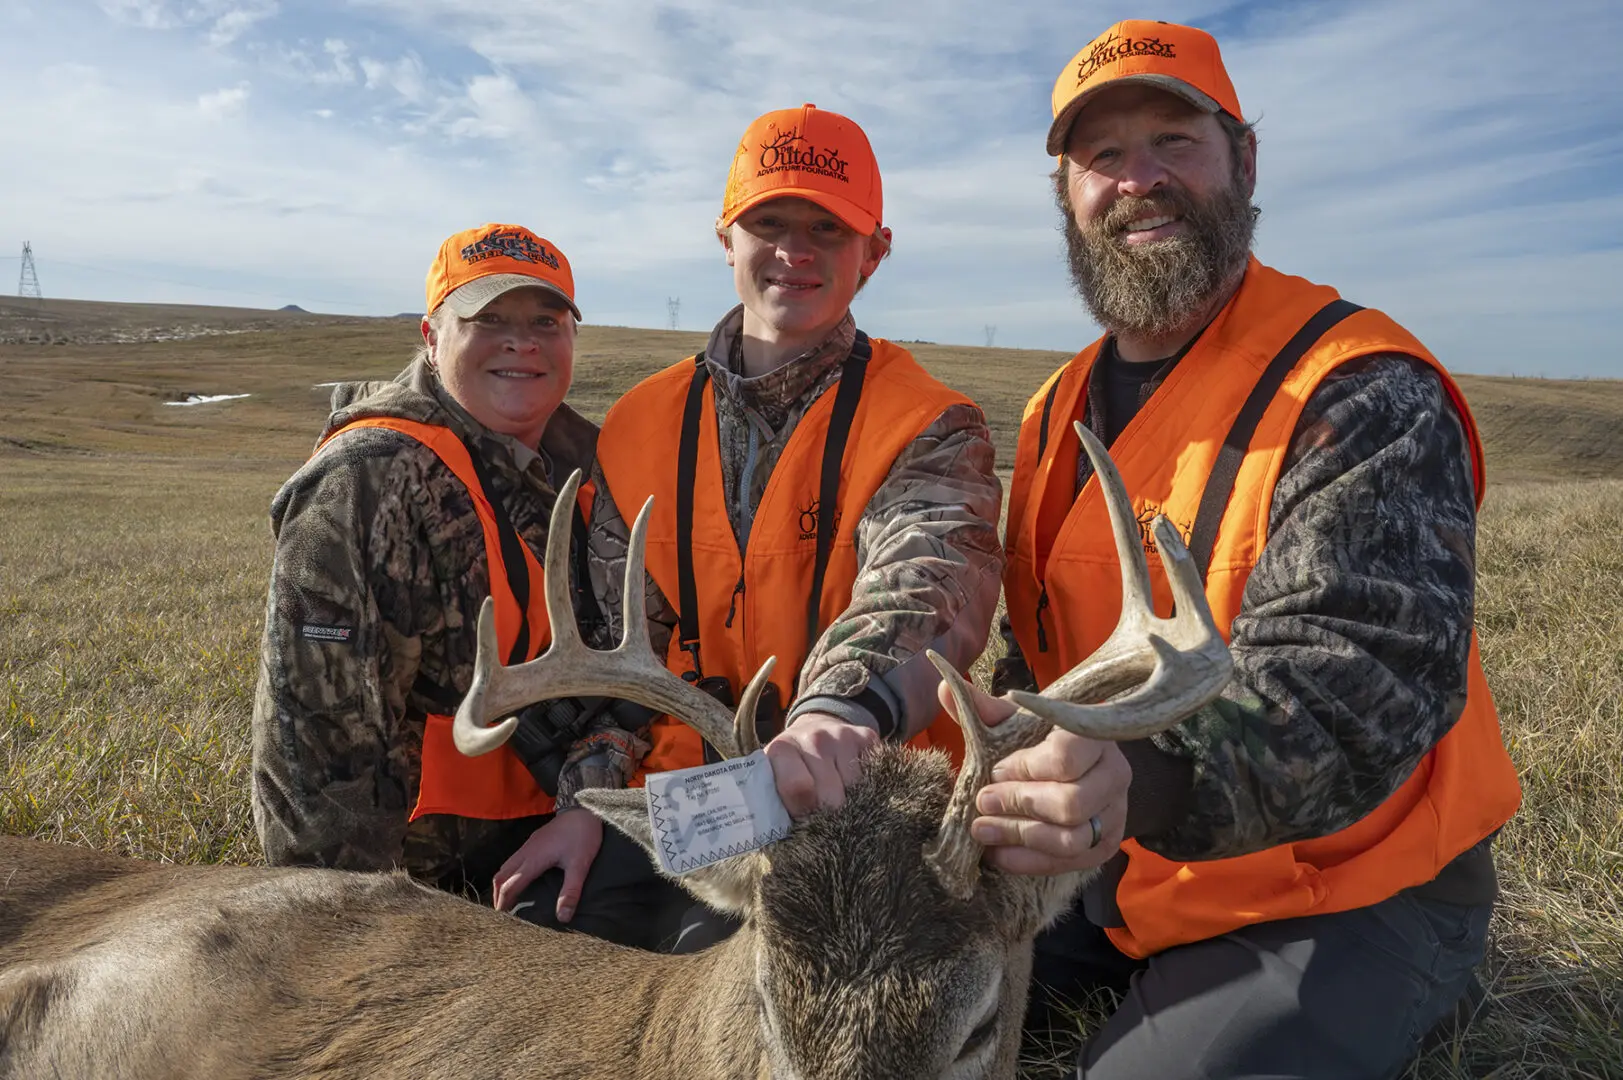 From left to right Kara Ohlsen, Dash Ohlsen and Taner Ohlsen pose with Dash's white-tailed buck